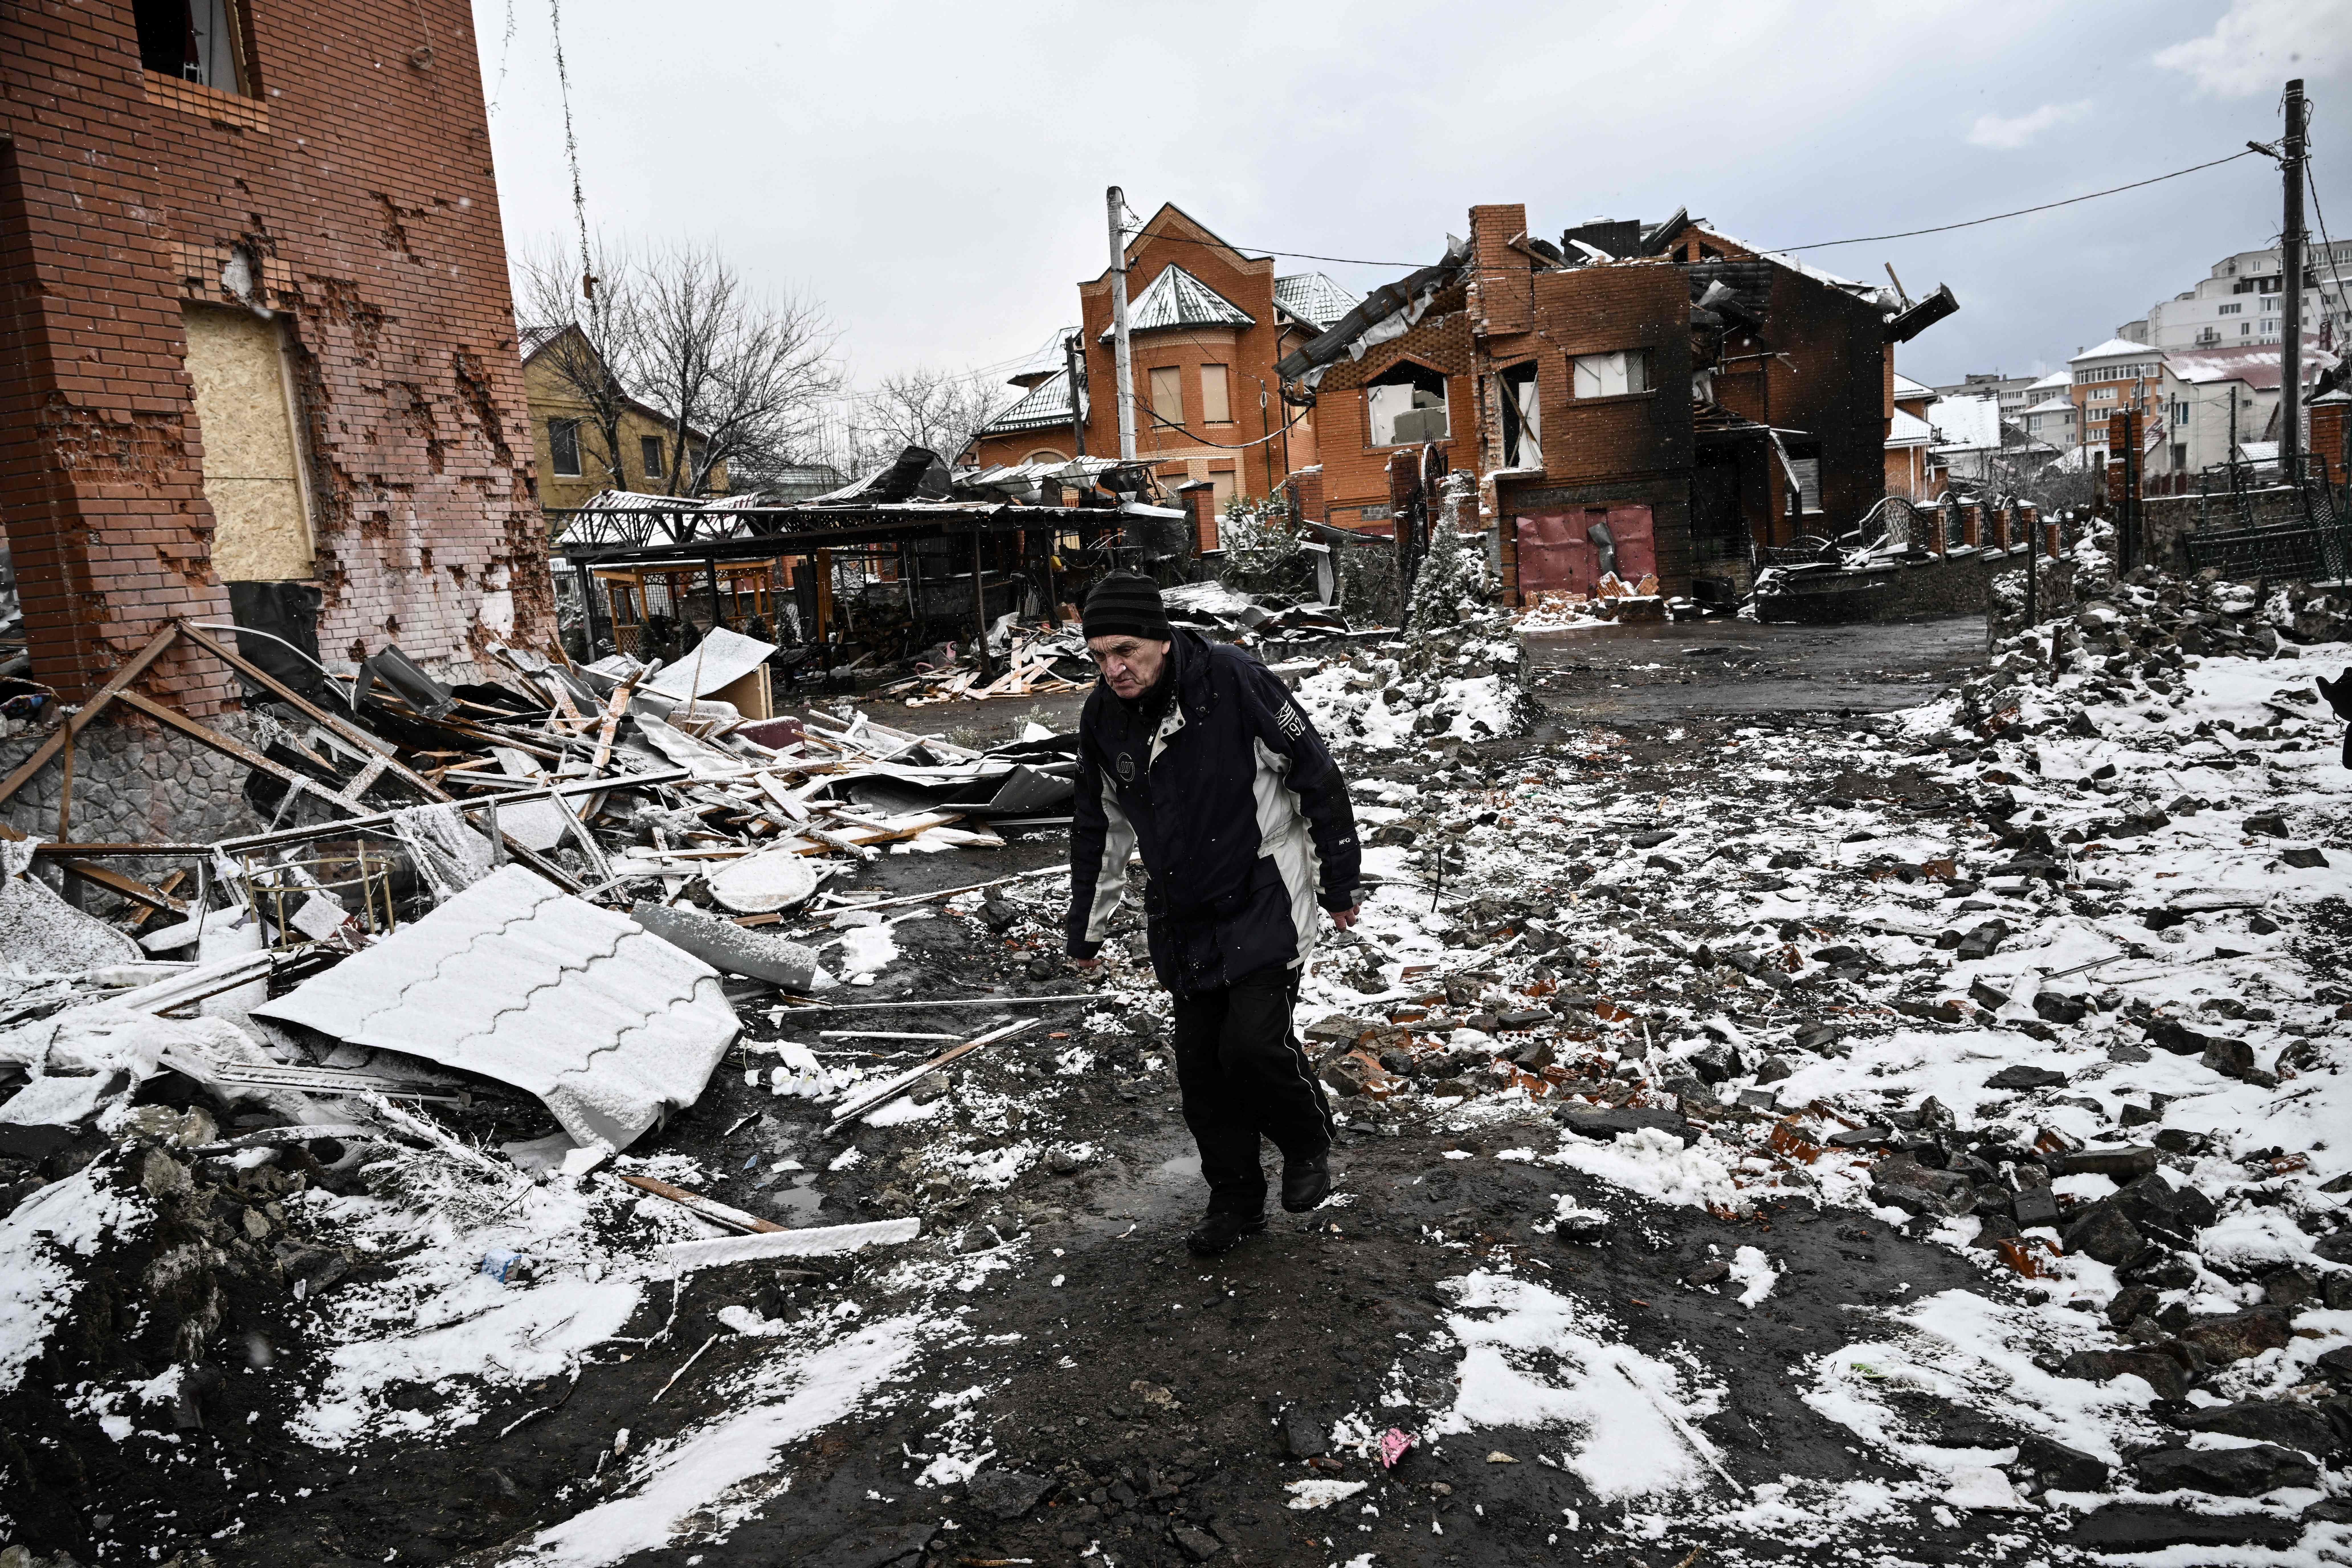  A man walks between houses destroyed during air strikes on the central Ukranian city of Bila Tserkva on March 8.